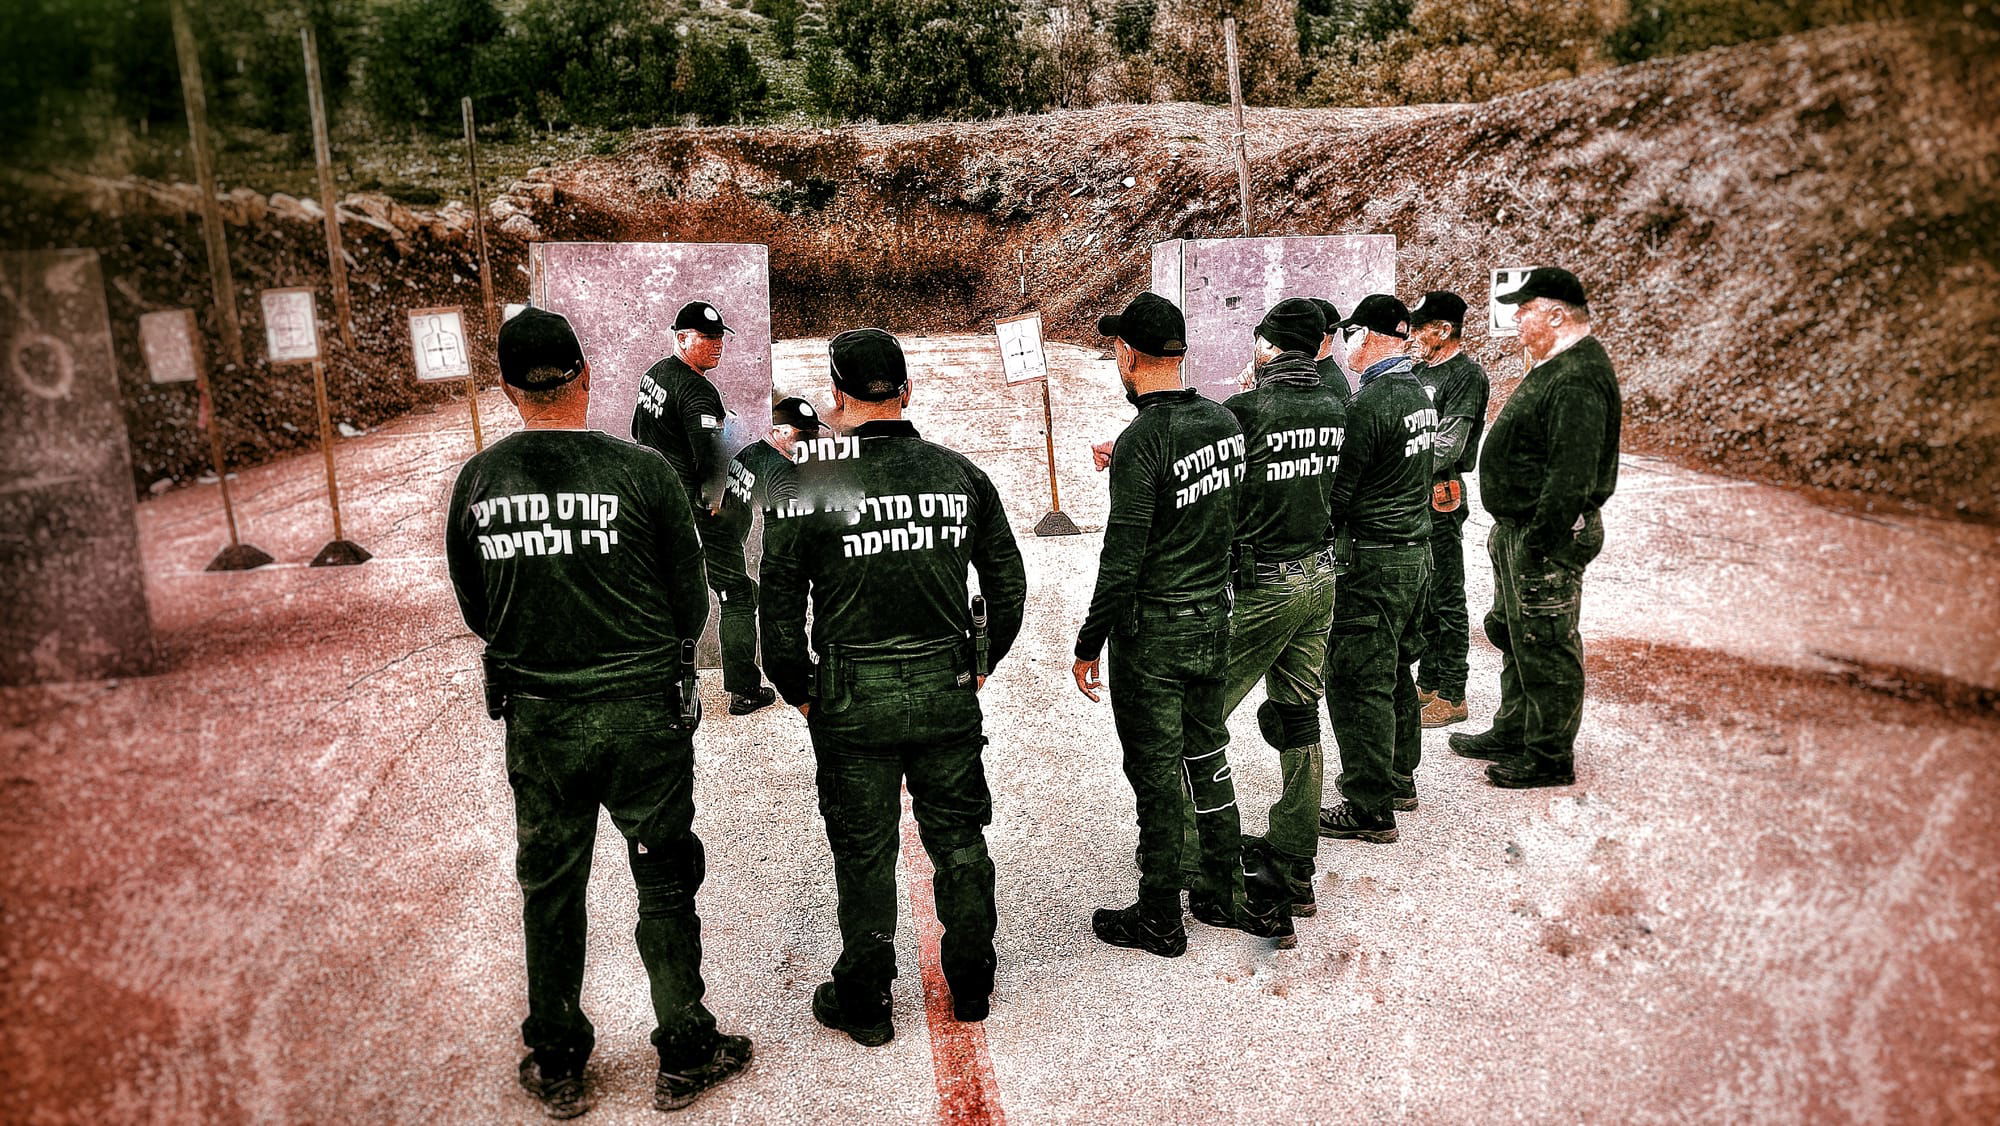 Shooting instructors course, 186 hours under the guidance of the Ministry of Internal Security, Firearms Division.